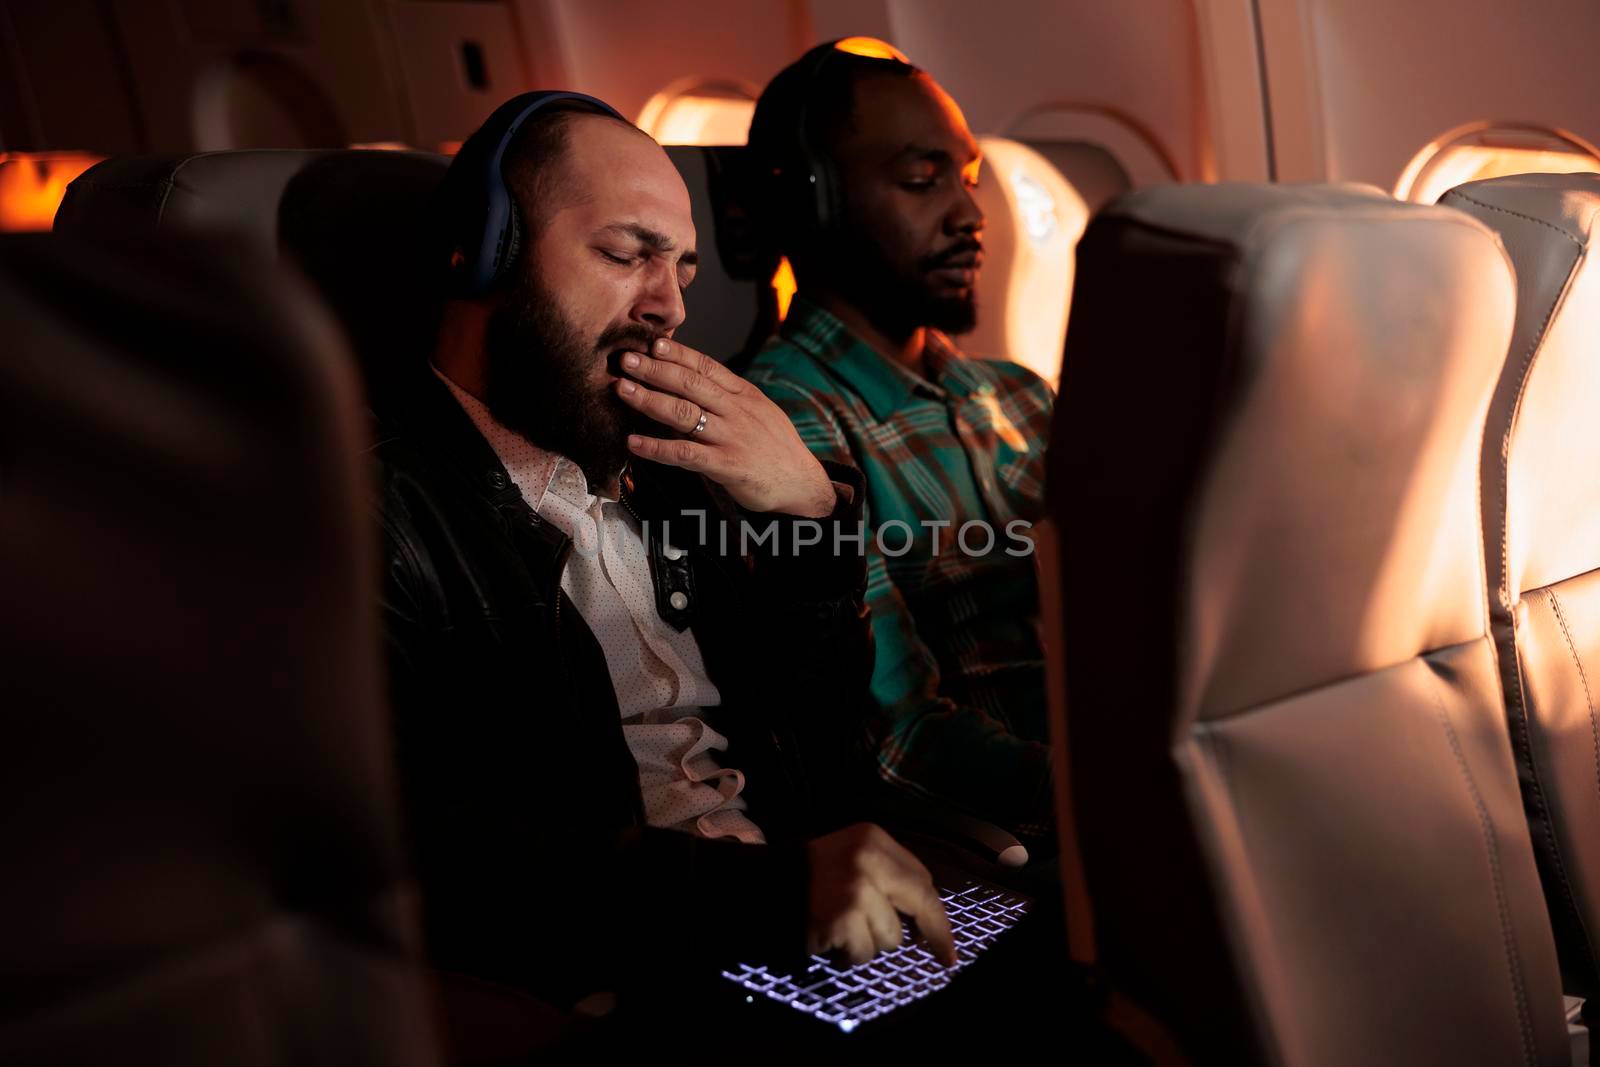 Diverse people sitting in airplane on commercial flight by DCStudio